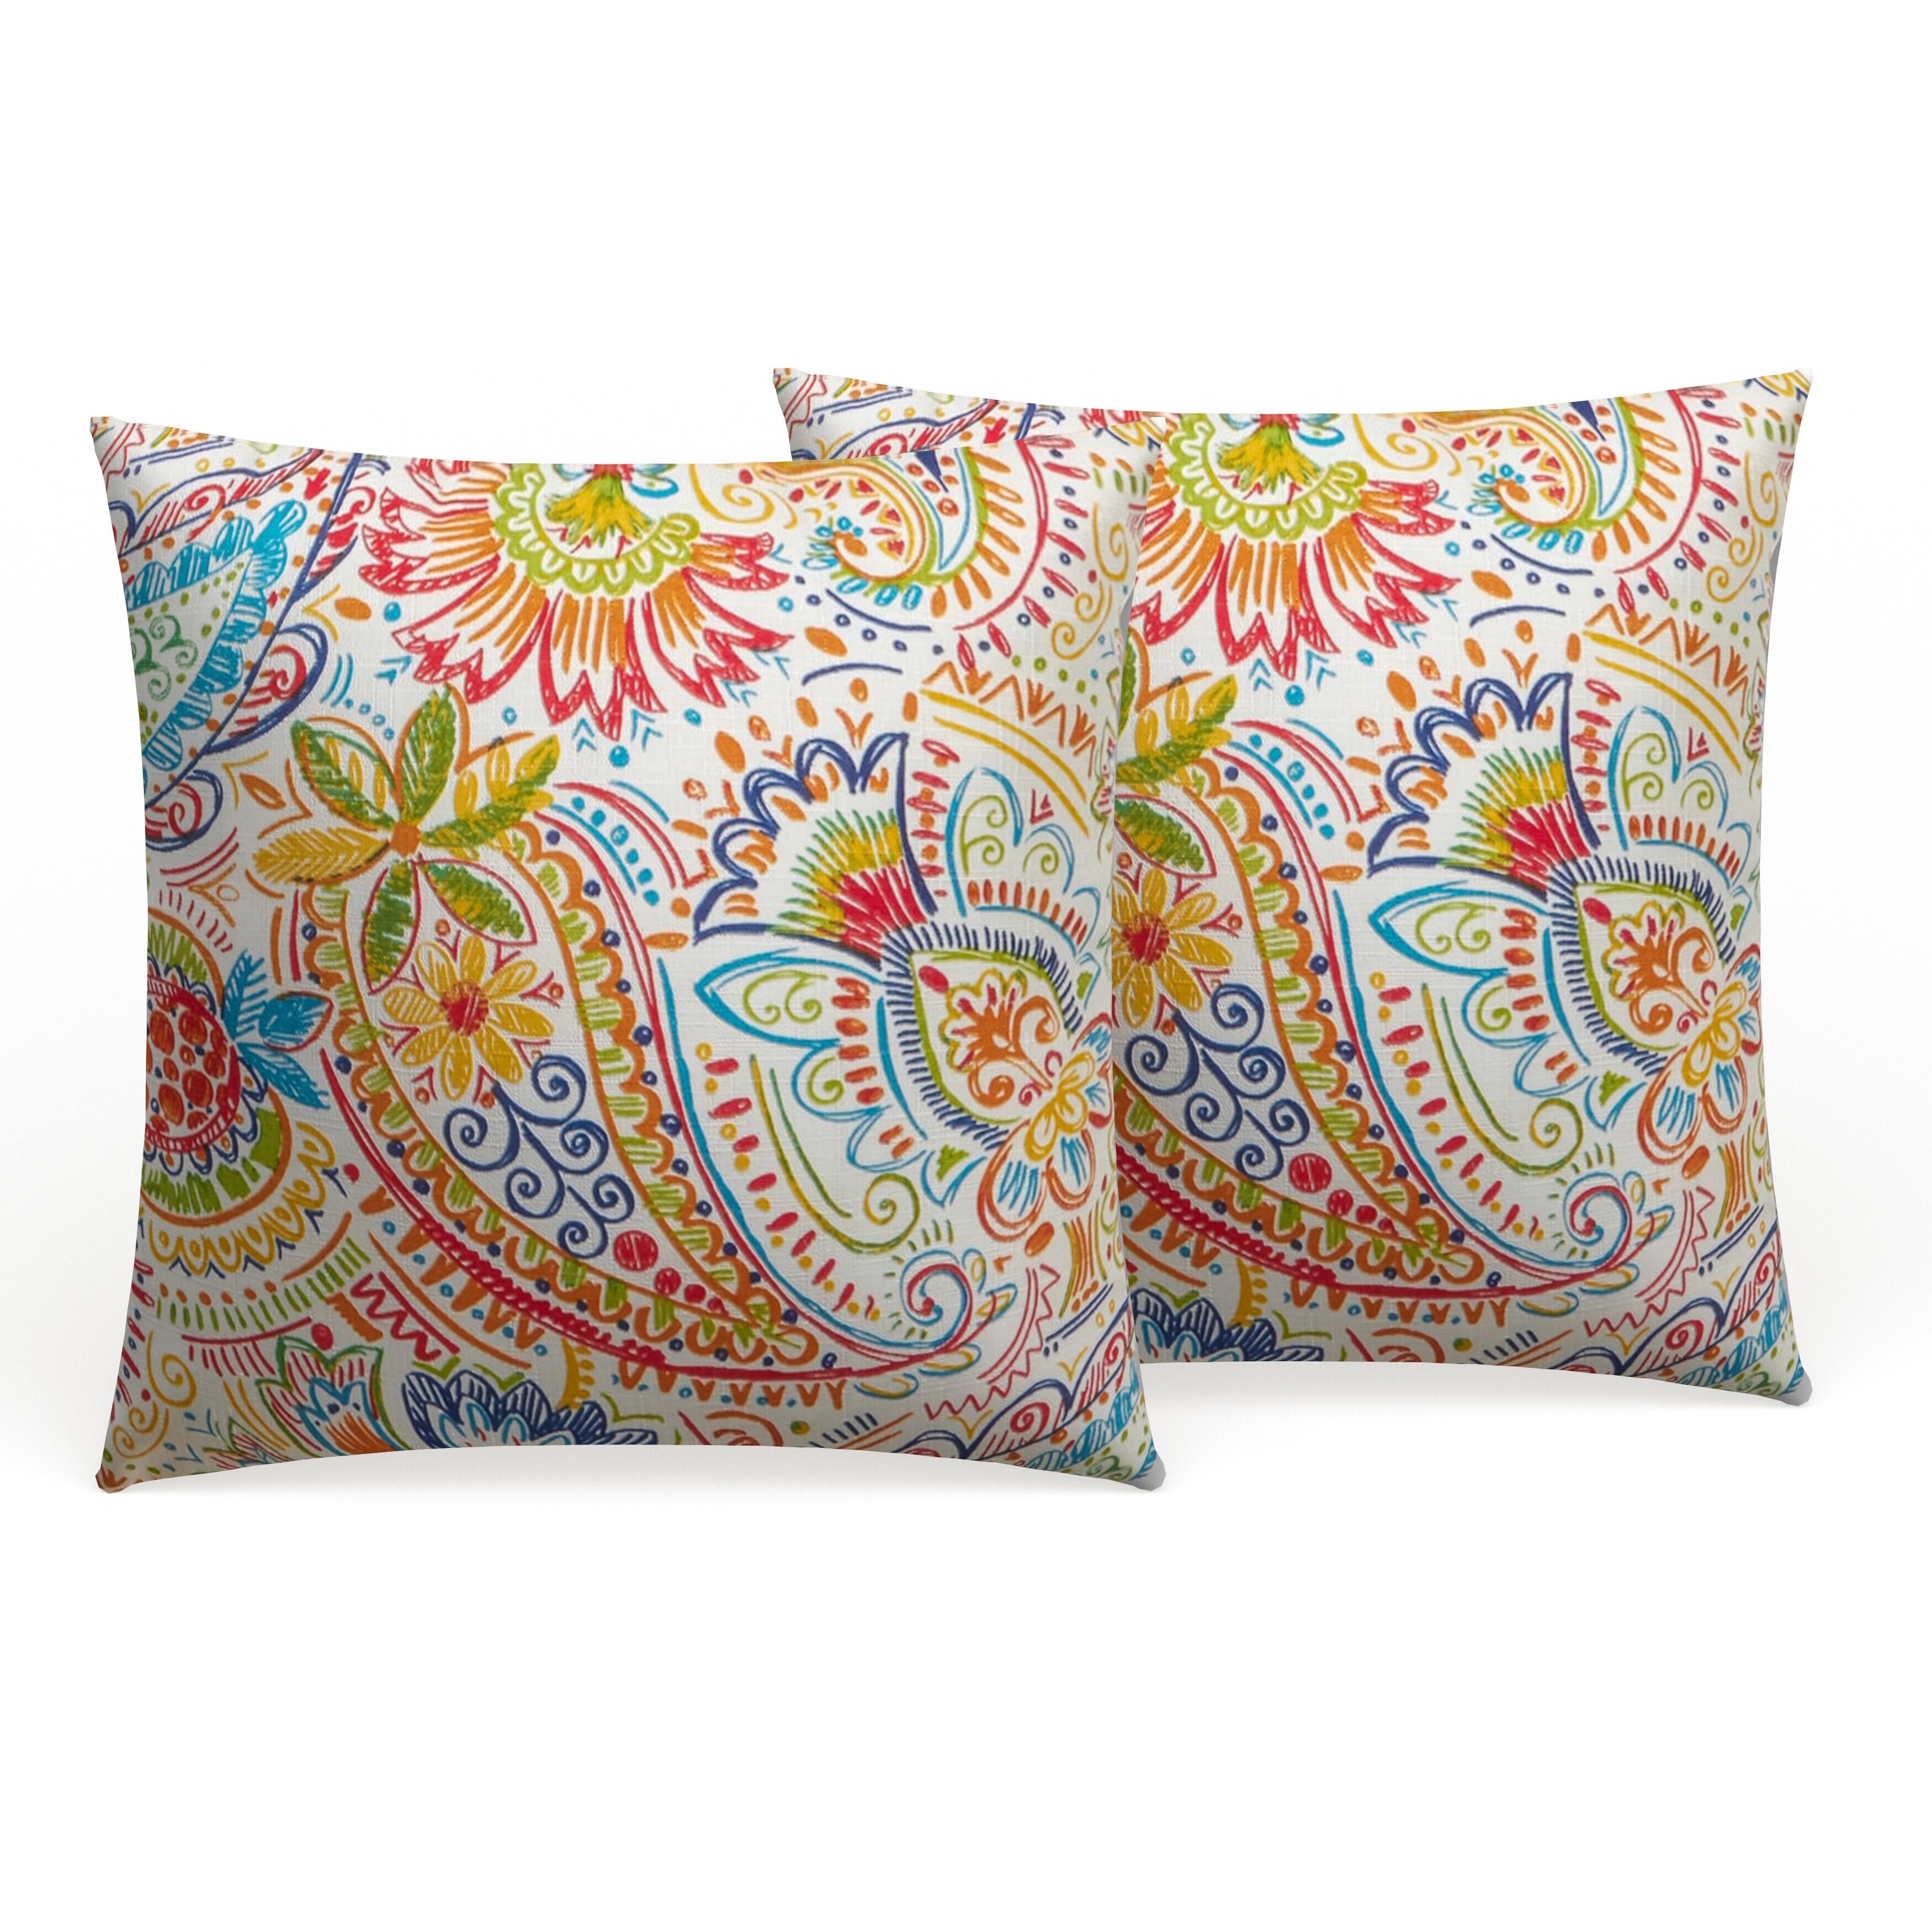 https://ak1.ostkcdn.com/images/products/is/images/direct/1297819ad01d8f857d1e1943721da78410a0a8db/Christiansen-Paisley-Outdoor-Throw-Pillow-%28Set-of-2%29-by-Havenside-Home.jpg